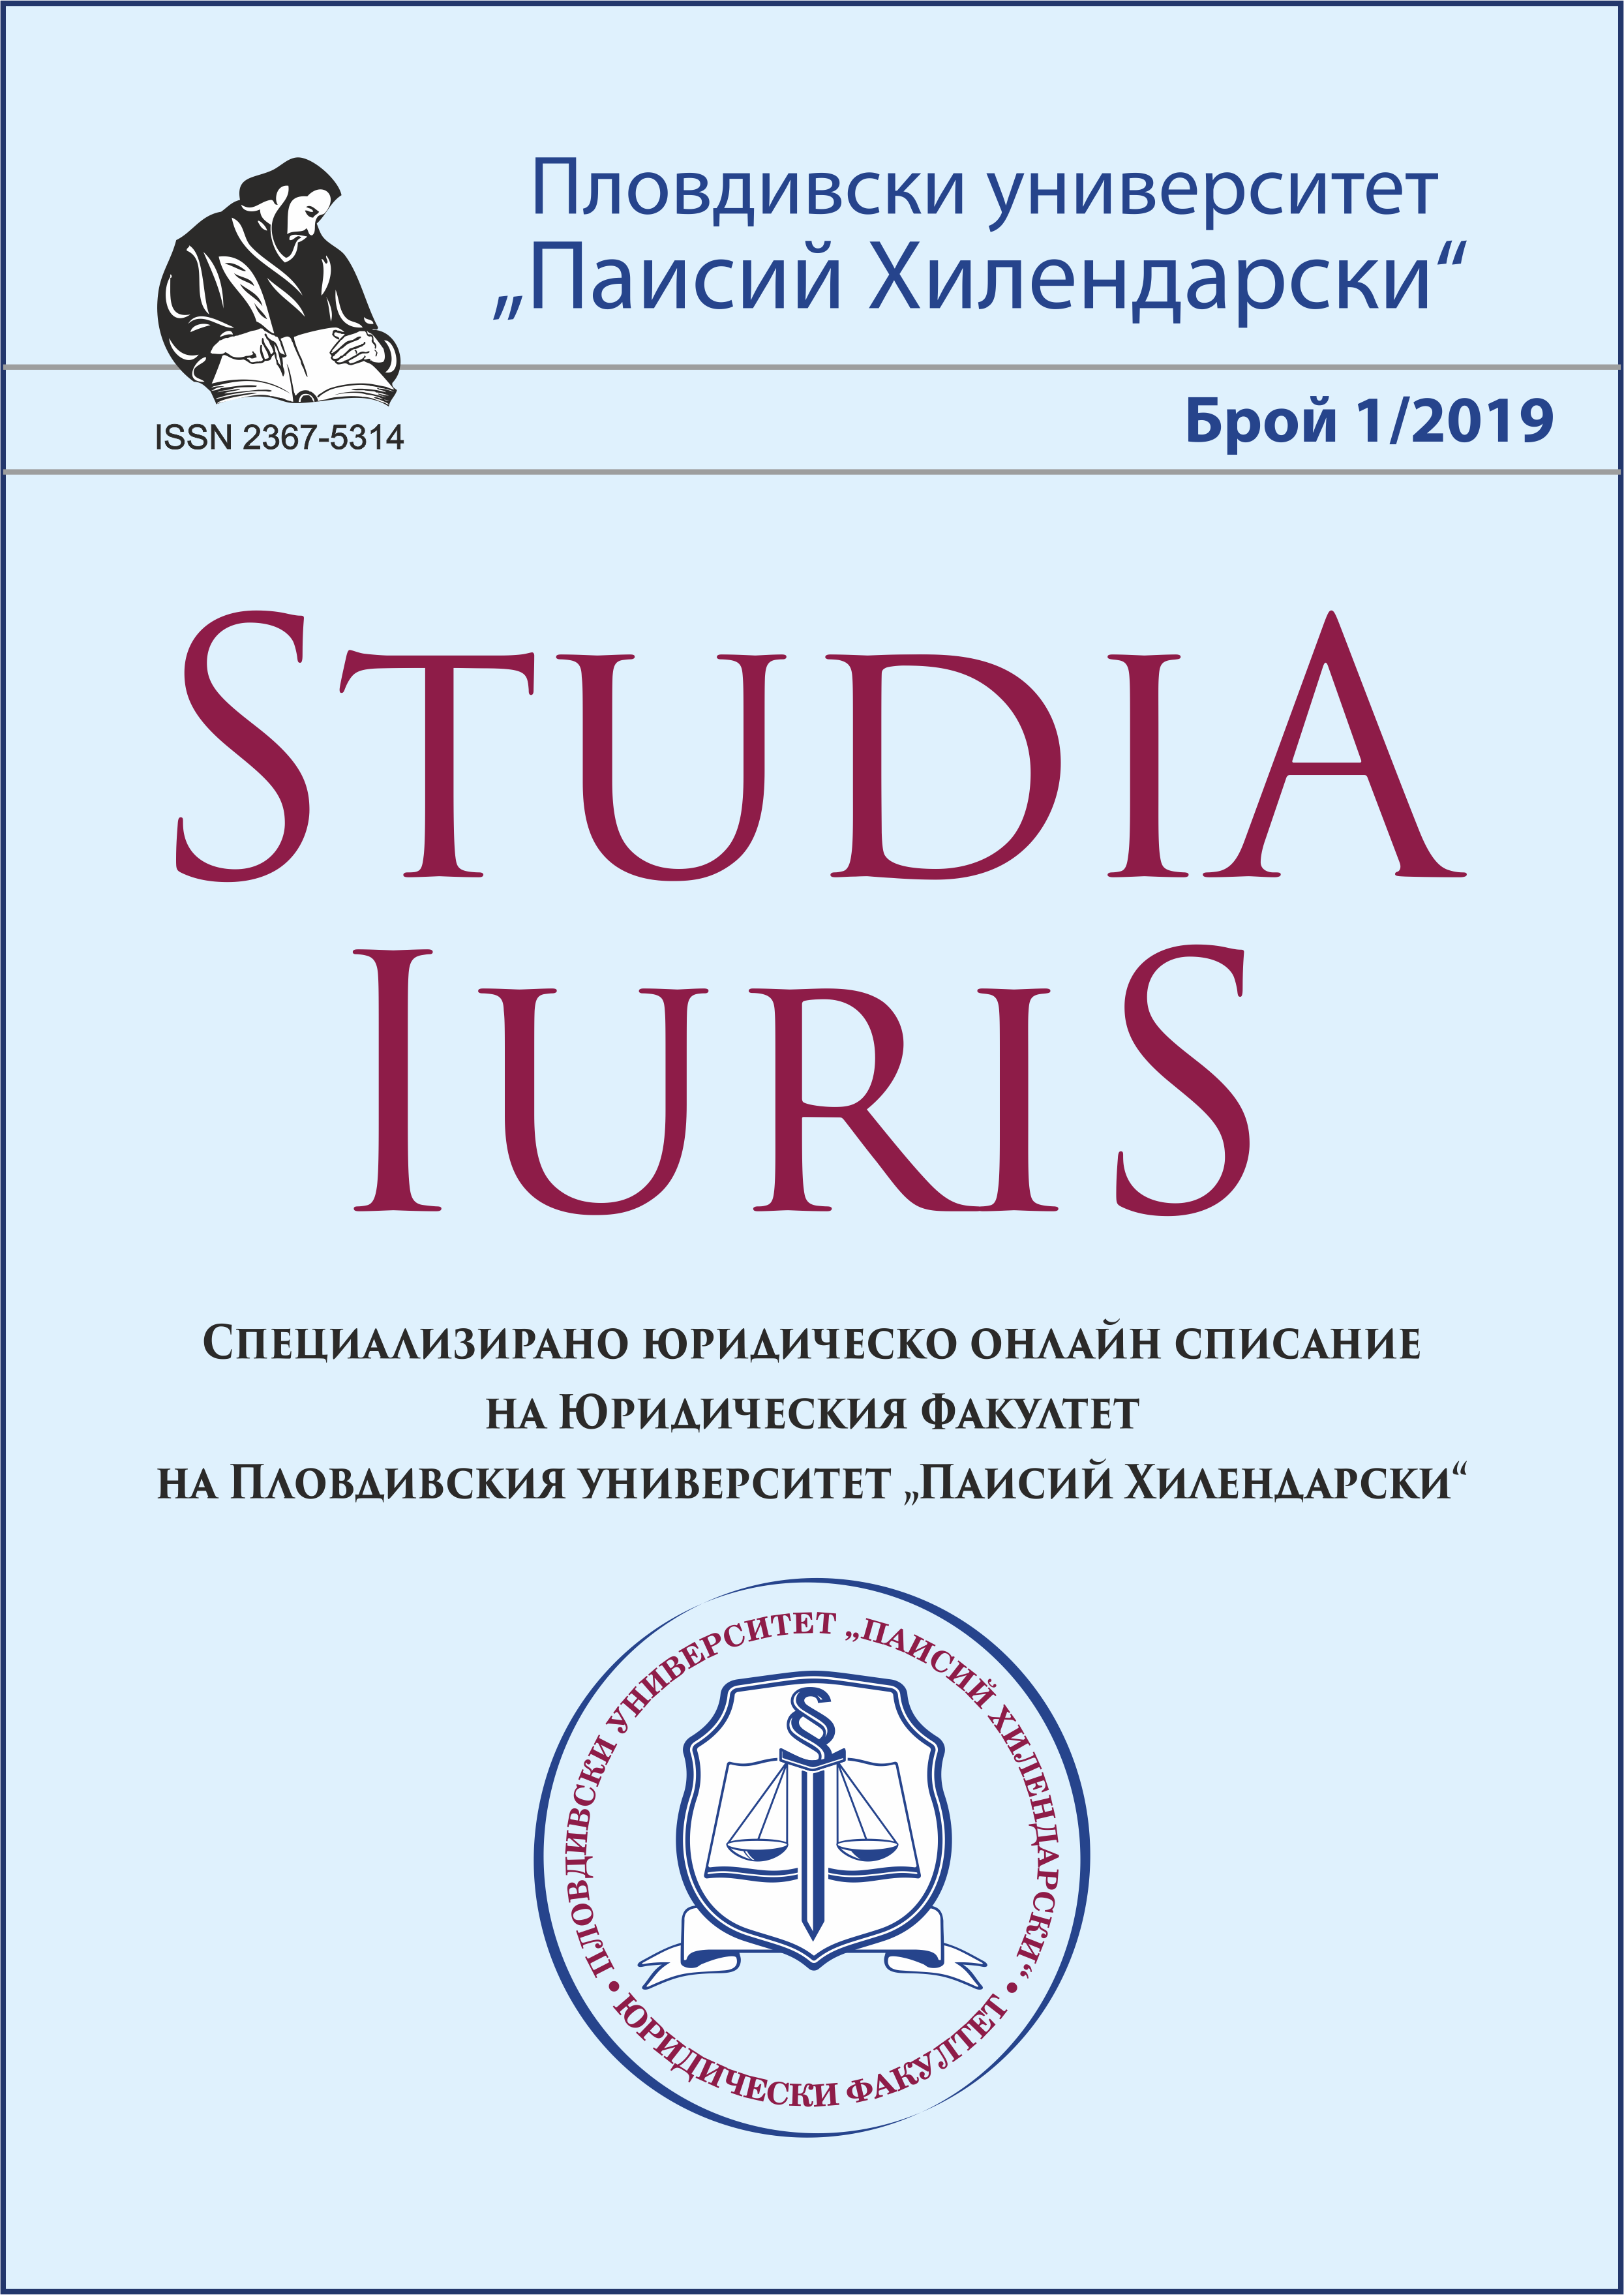 Offences Under the Bulgarian Criminal Code Related to Radicalization and Cultural Differences in Society Cover Image